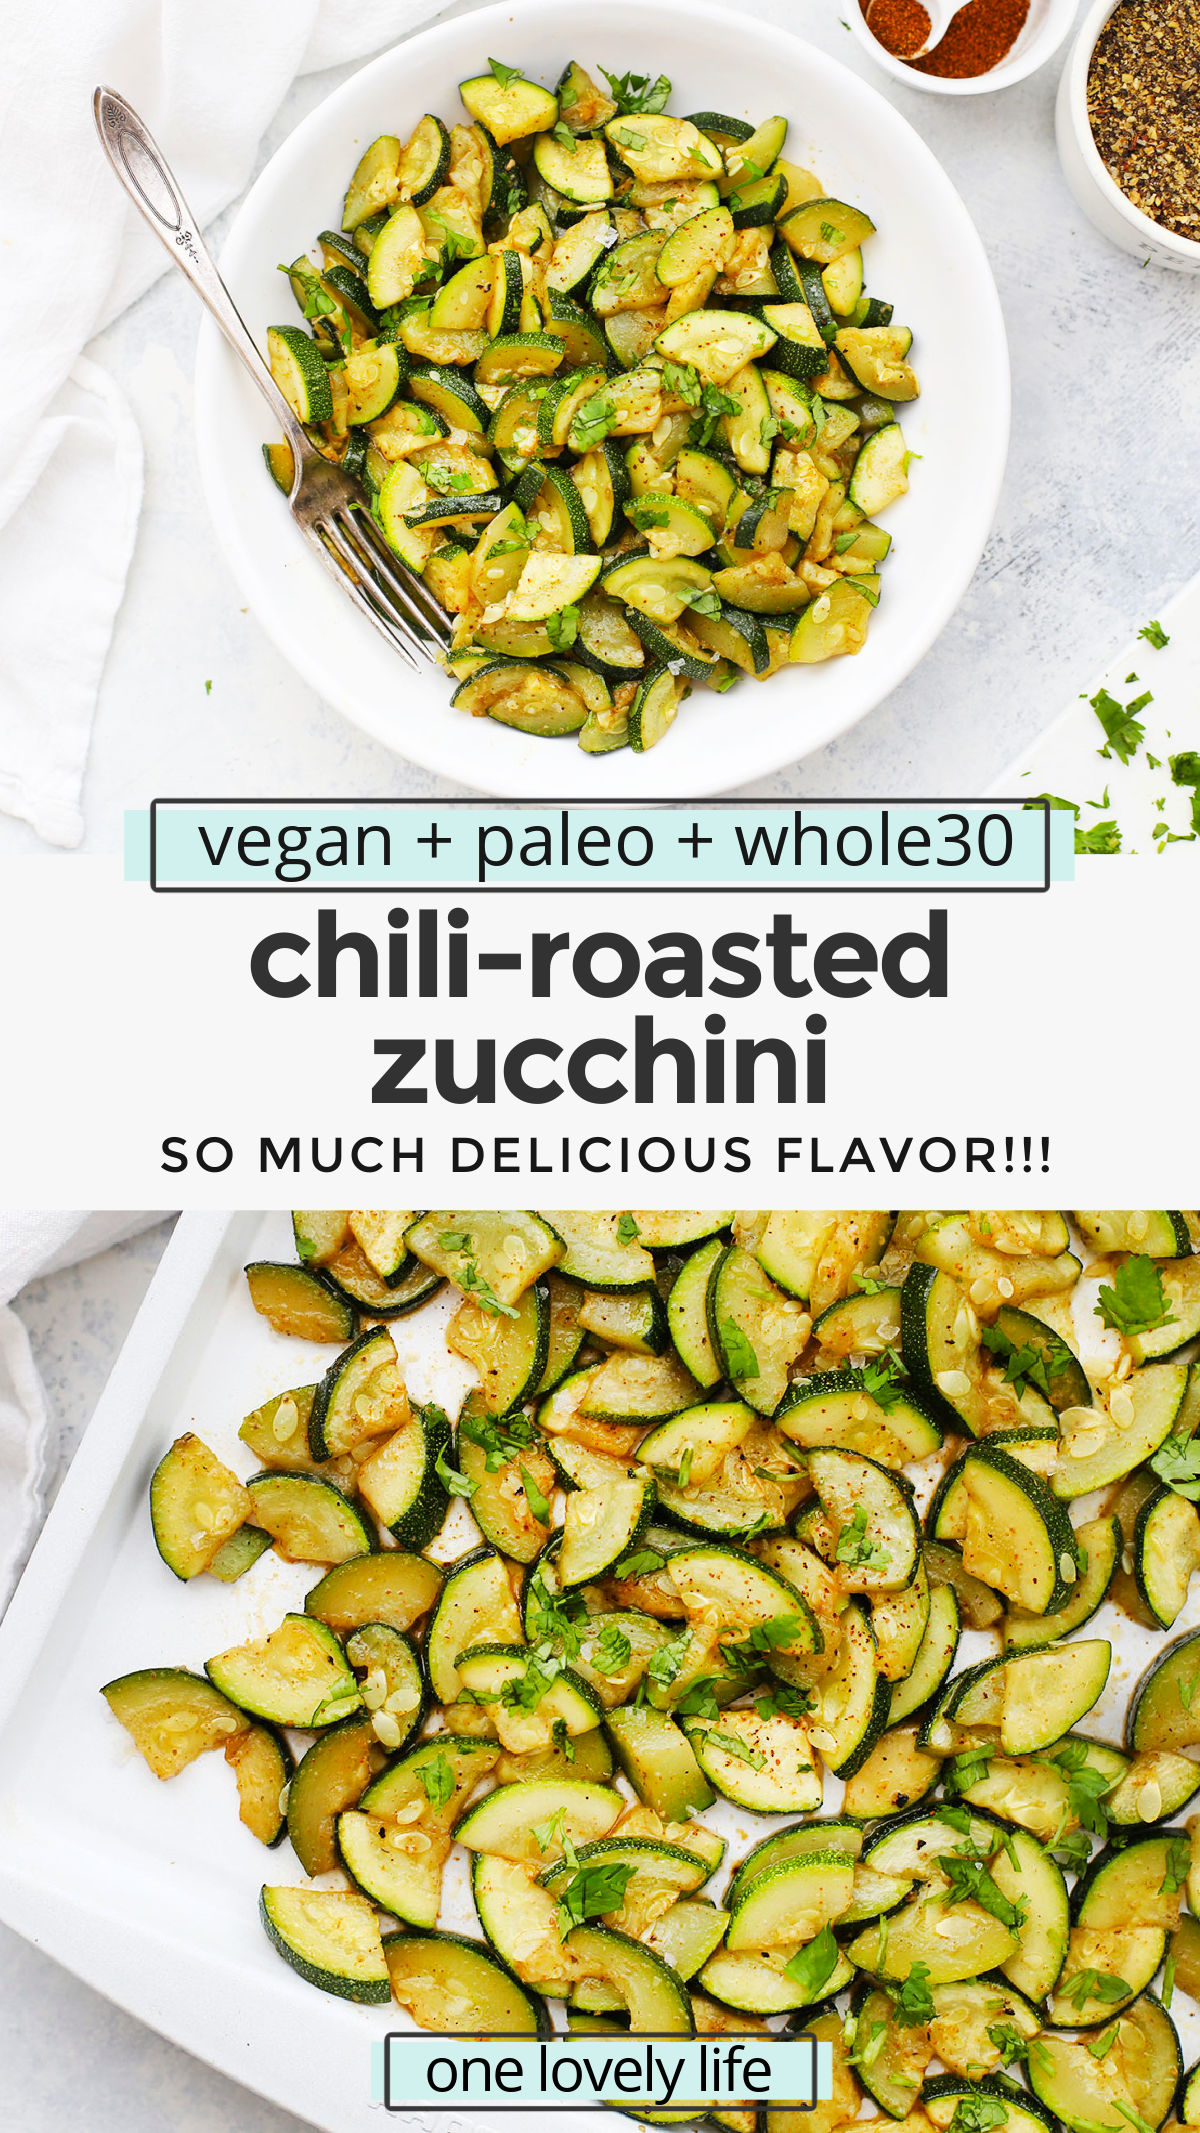 Chili Roasted Zucchini - This easy zucchini recipe is one of our favorites. Simple spices make these zucchini wedges the perfect easy side dish! (Paleo, Vegan, and Whole30 approved!) // Gluten free // roasted zucchini recipe // the best roasted zucchini recipe // paleo side dish // whole30 side dish // healthy vegetable recipe // vegan side dish // roasted veggies